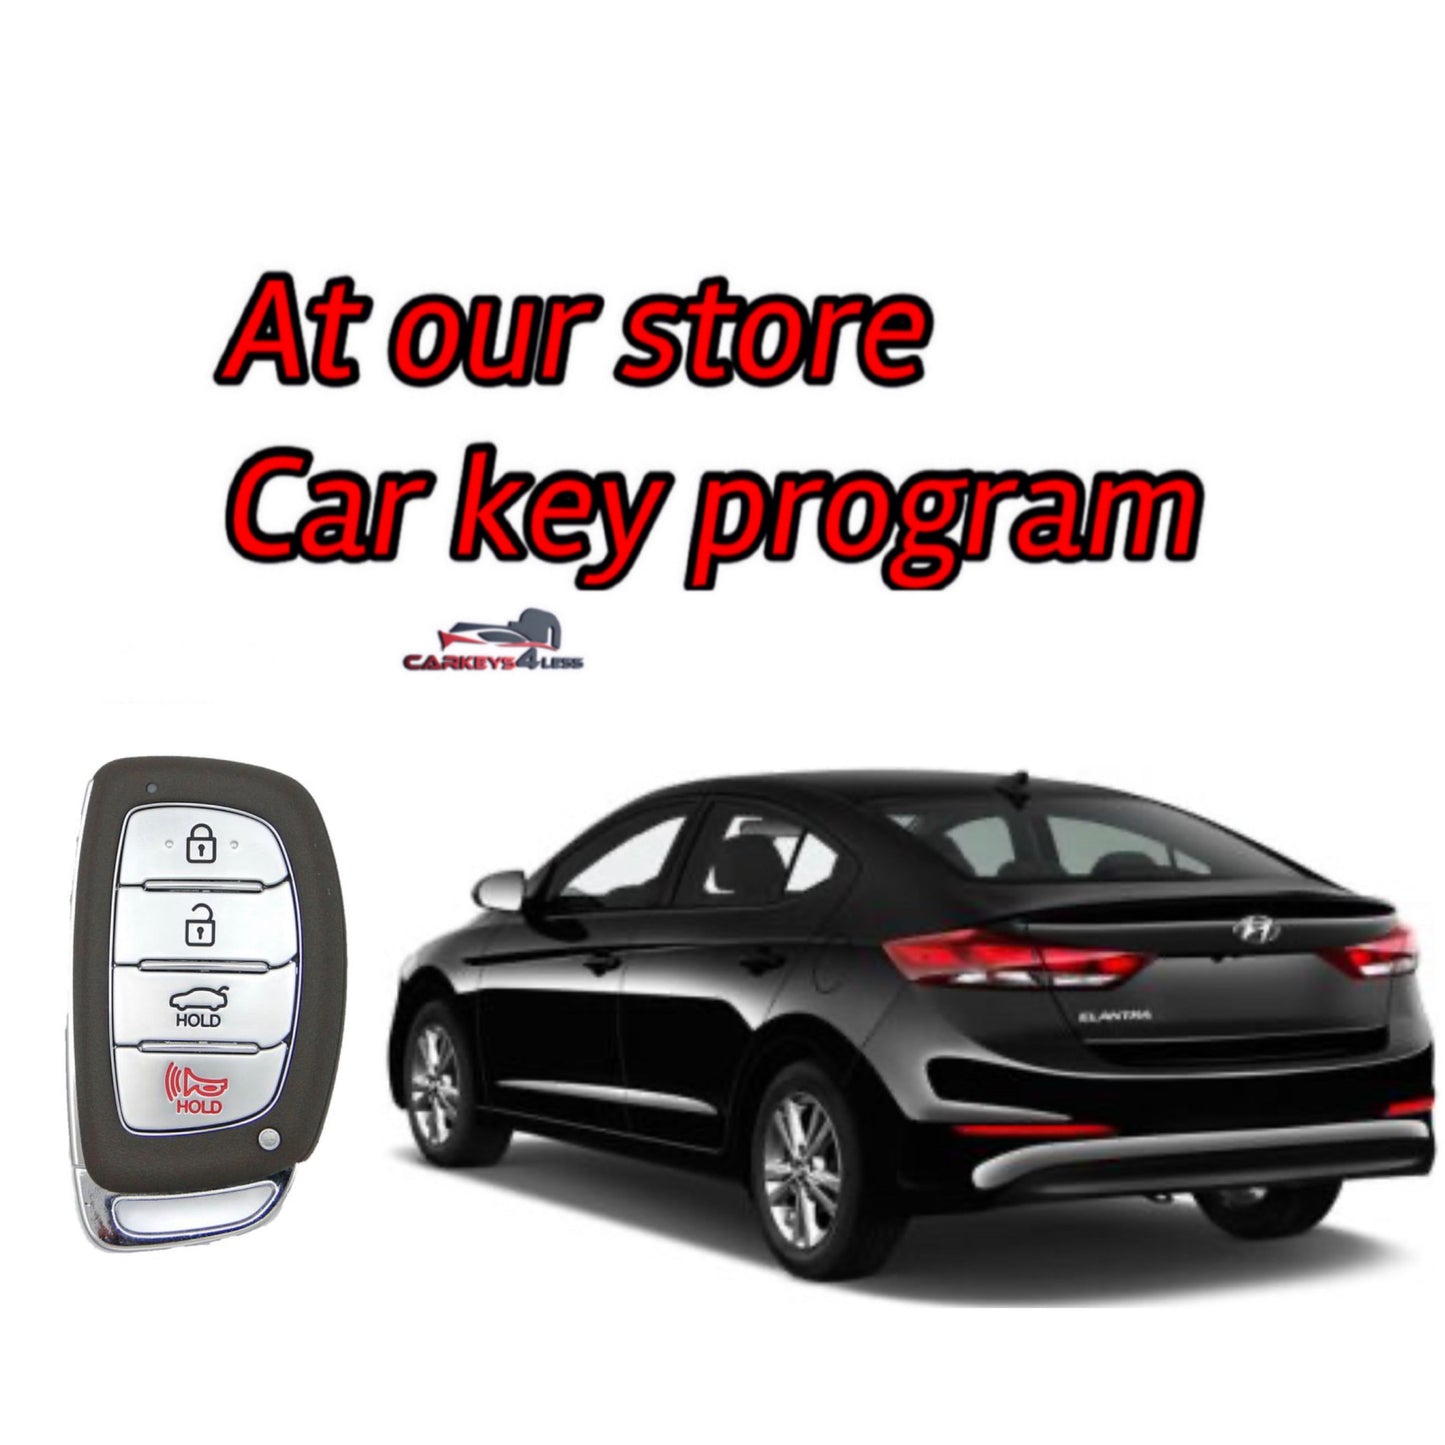 At our store an aftermarket car key for Hyundai